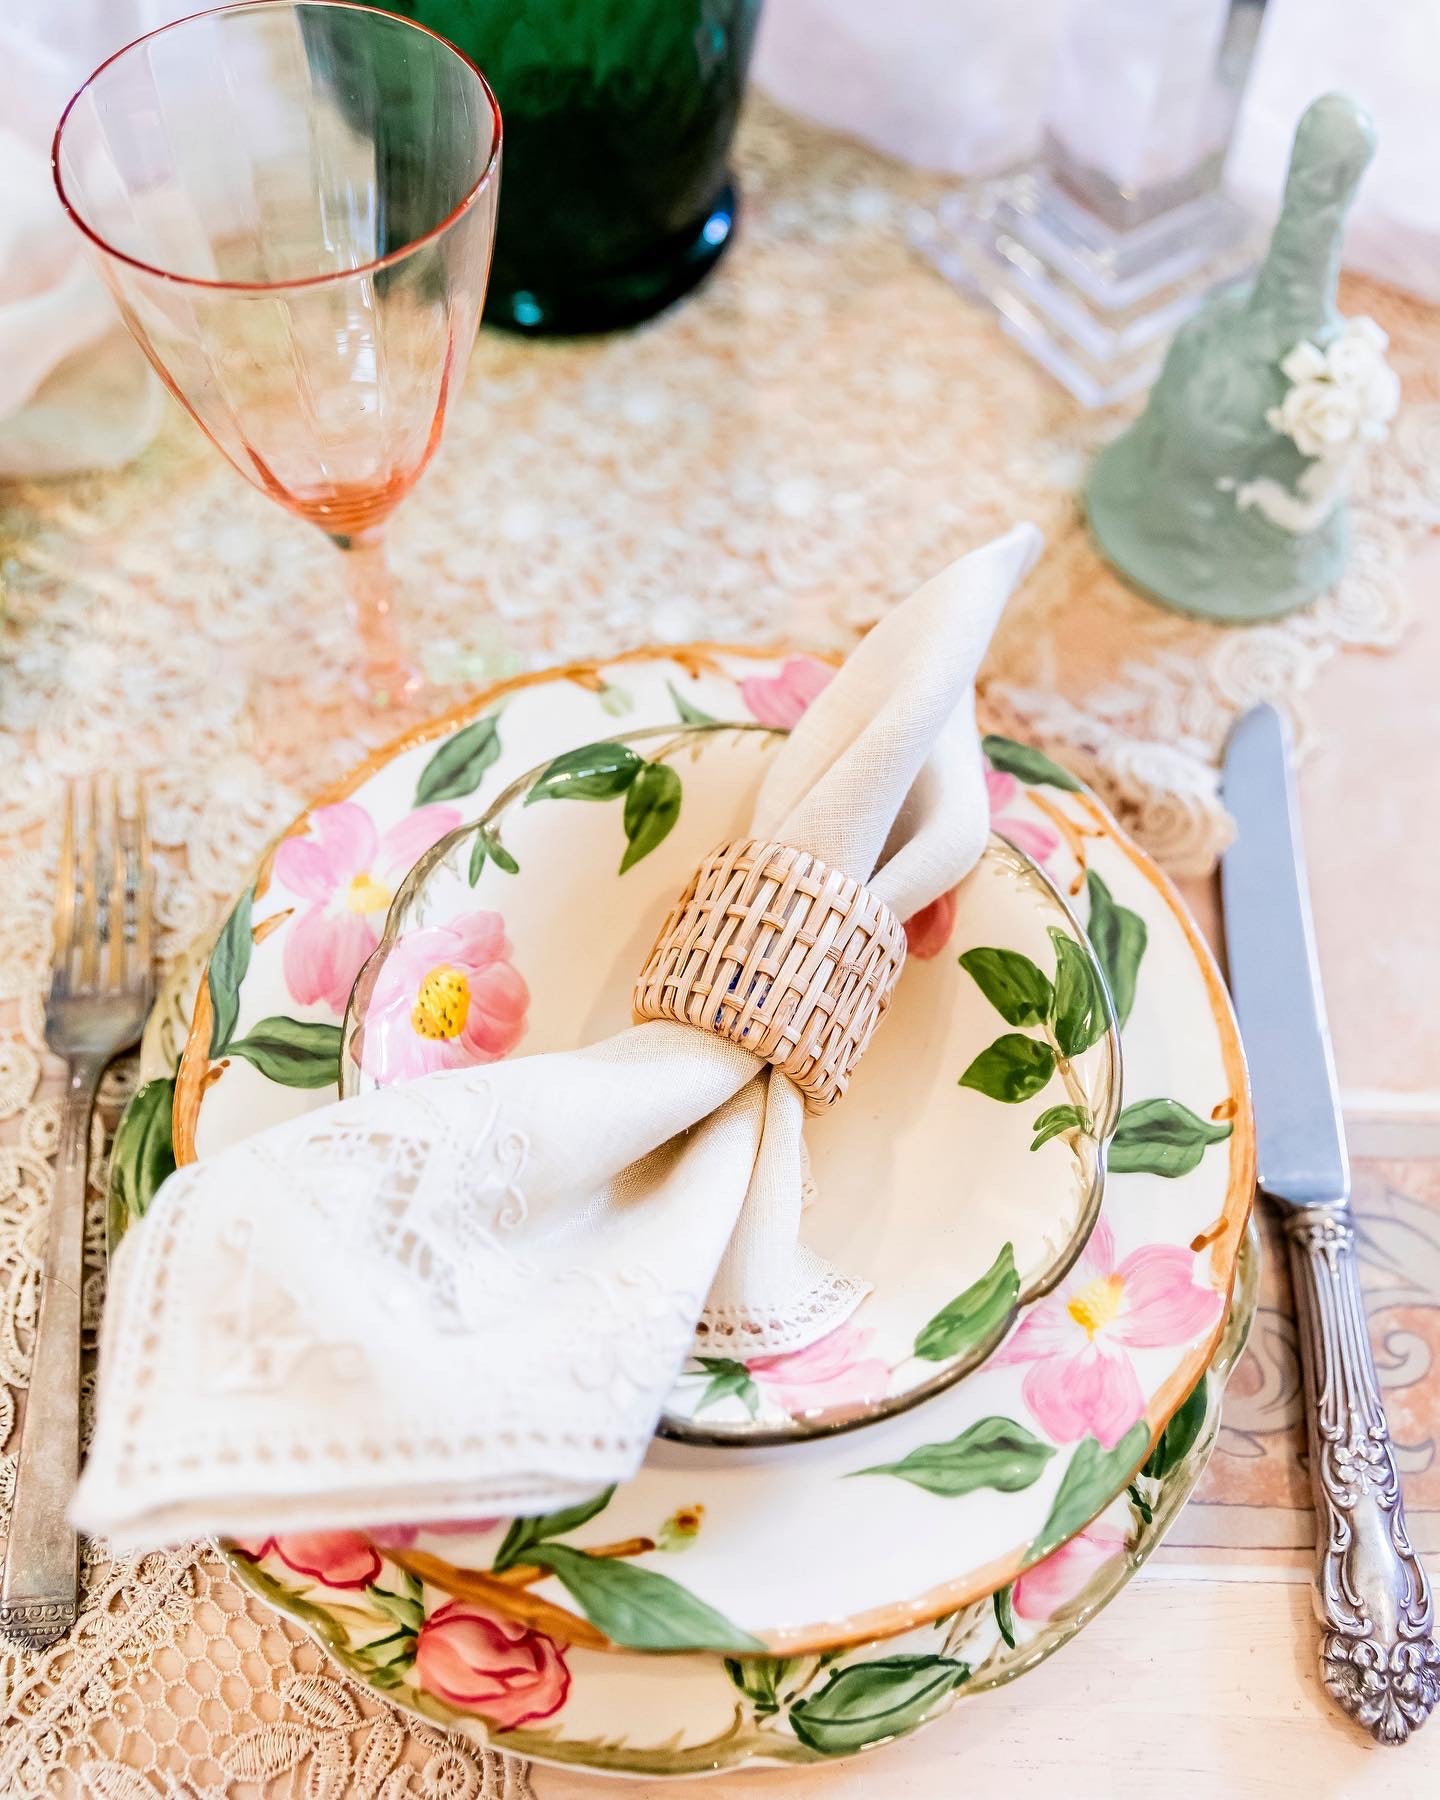 flowery china set with a napkin in a napkin ring set on a lace tablecloth